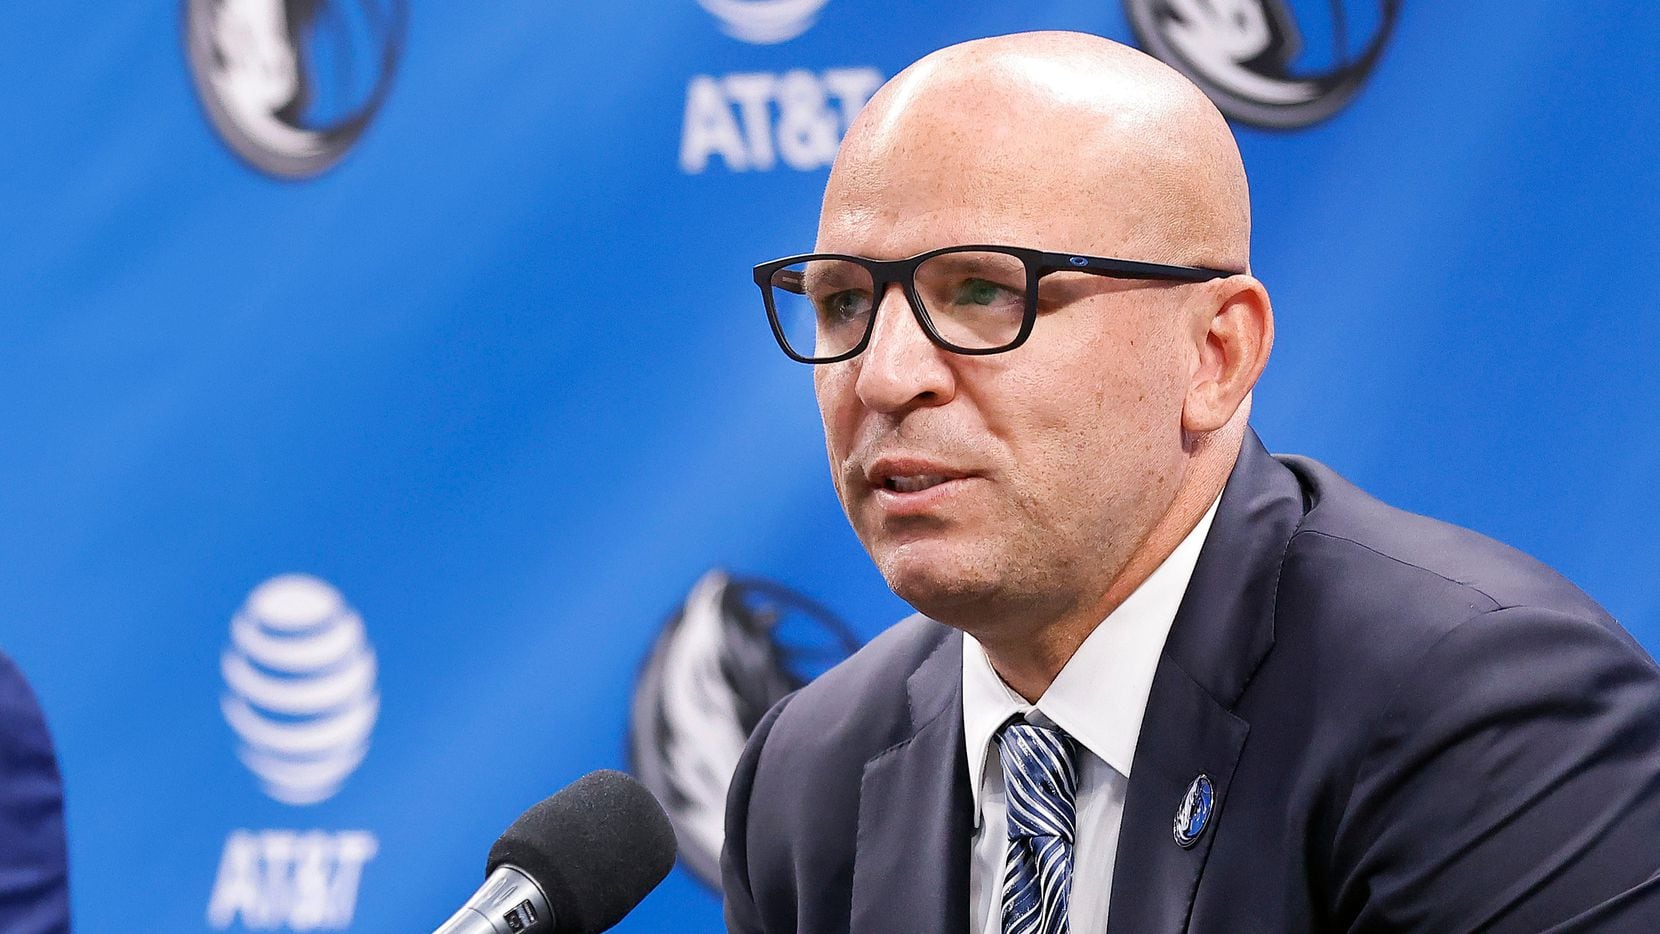 Dallas Mavericks new head coach Jason Kidd (right) and new general manager Nico Harrison respond to questions during a press conference to formally introduce them at the American Airlines Center, Thursday, July 15, 2021. (Tom Fox/The Dallas Morning News)